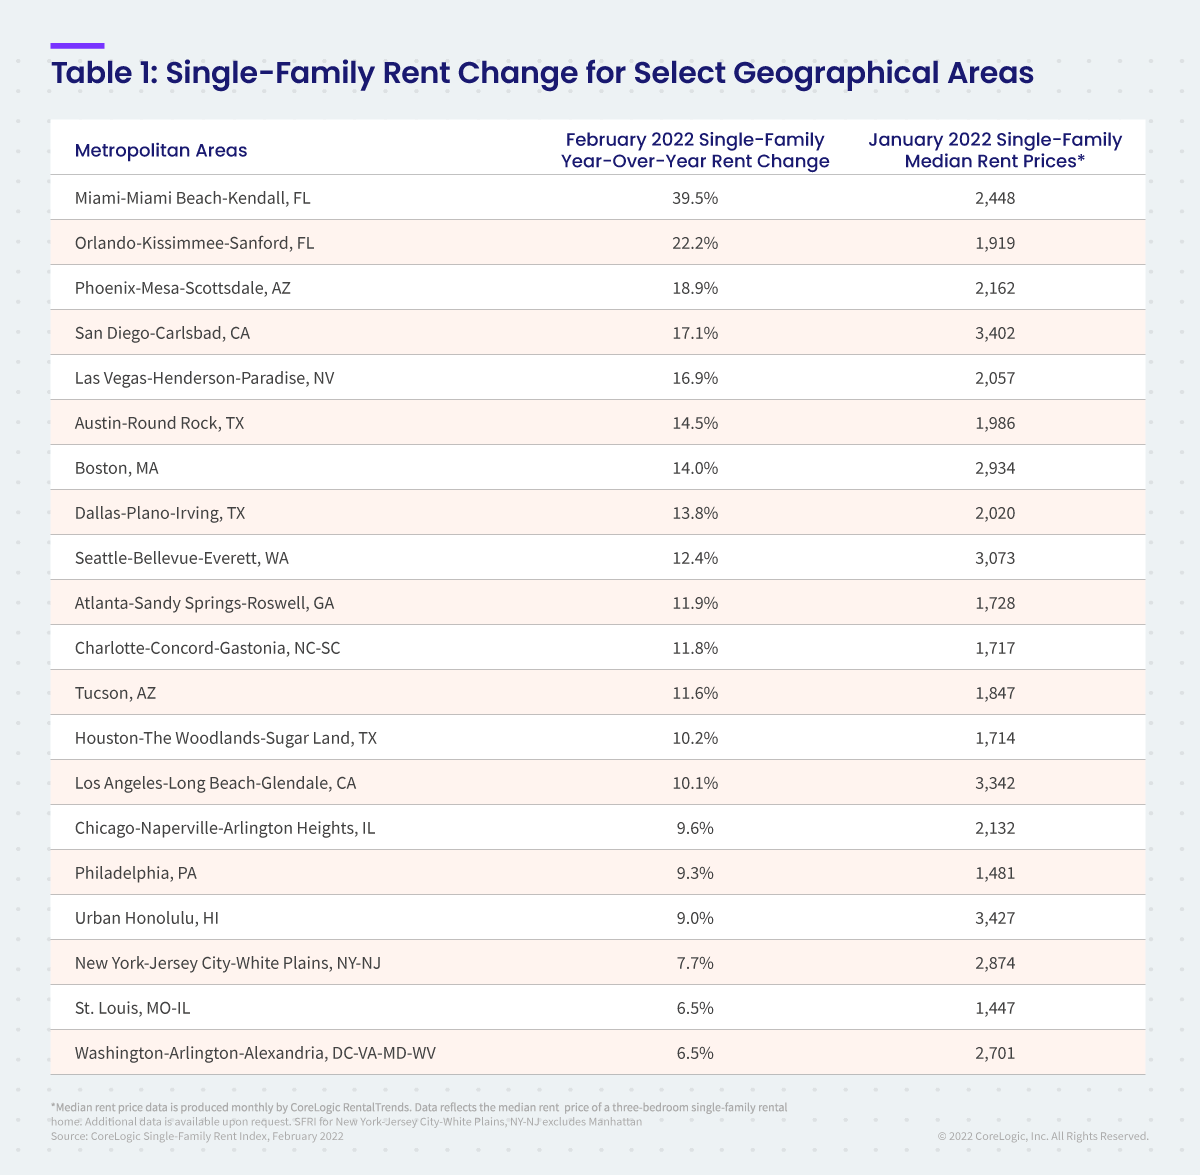 Table 1: Single-Family Rent Change for Select Geographical Areas